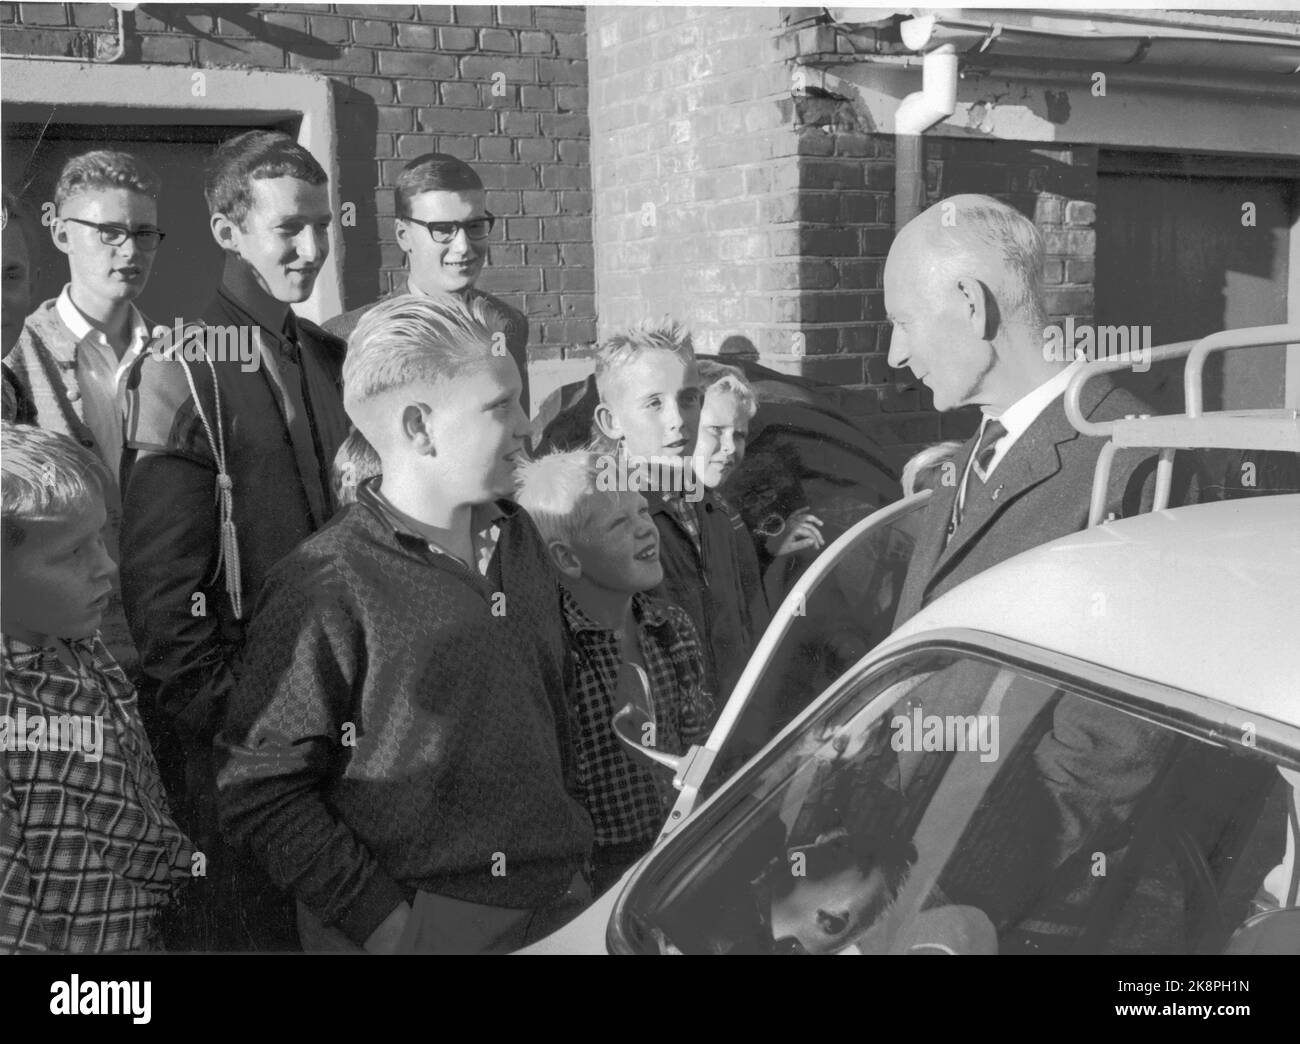 Hamar 196309 Former Prime Minister Einar Gerhardsen at the election campaign for the Labor Party ahead of the municipal elections. Here he visits Hamar. Gerhardsen with children and adolescents,- young fans. On the way into a car. Photo: Ivar Aaserud / Current / NTB Stock Photo